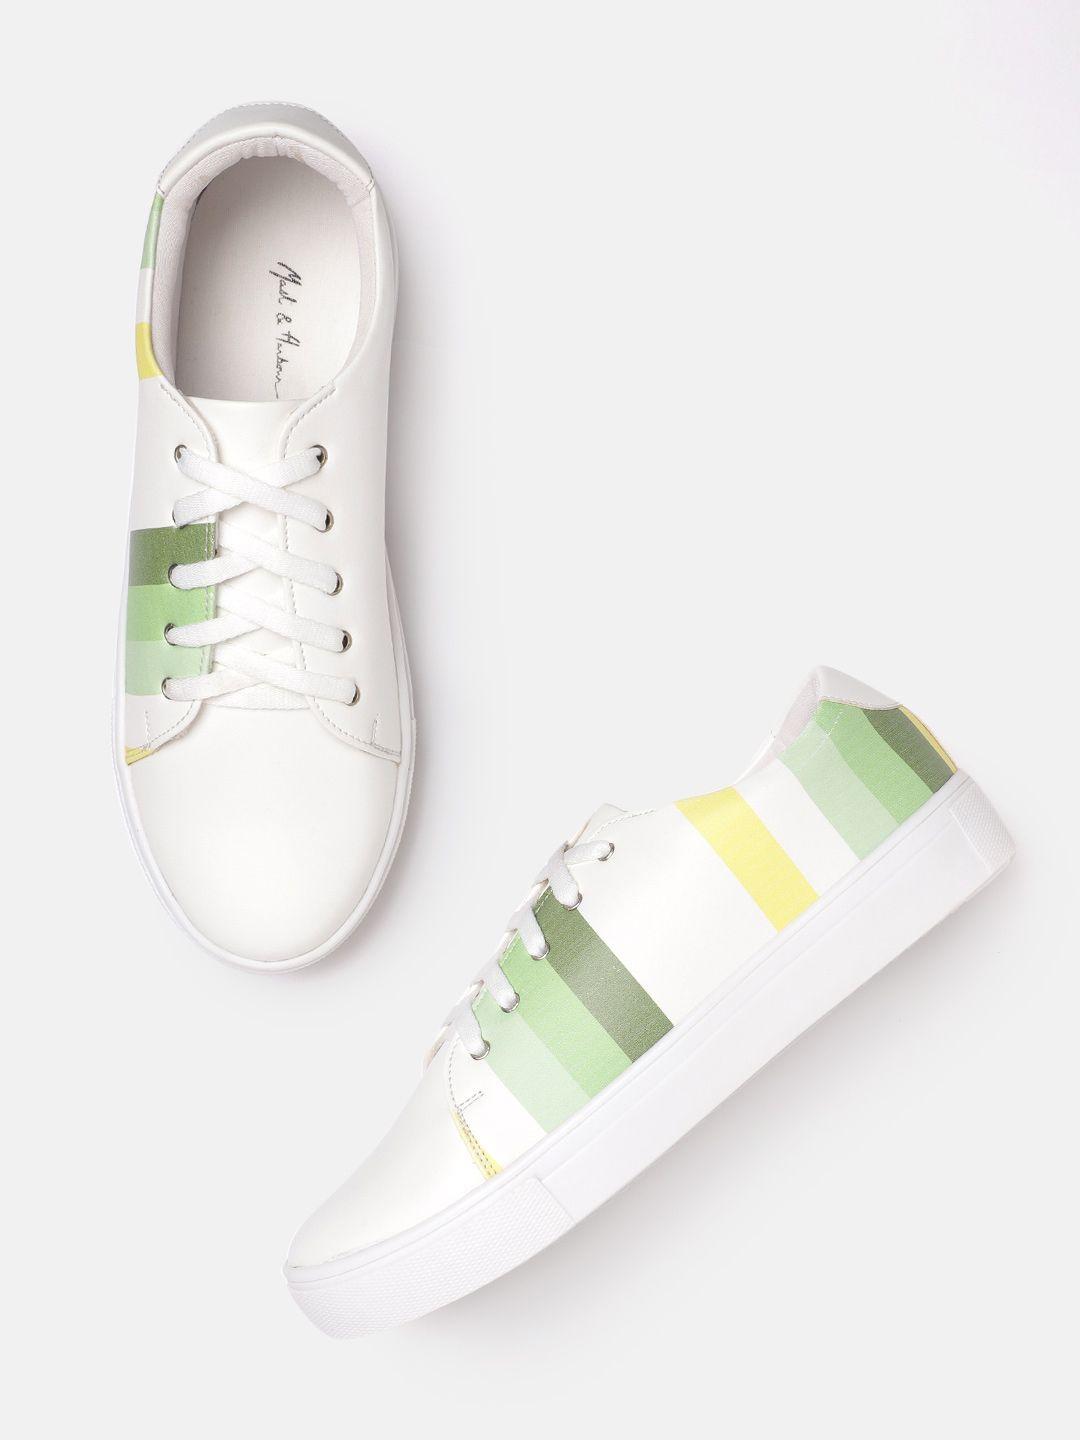 mast & harbour women white & green striped sneakers